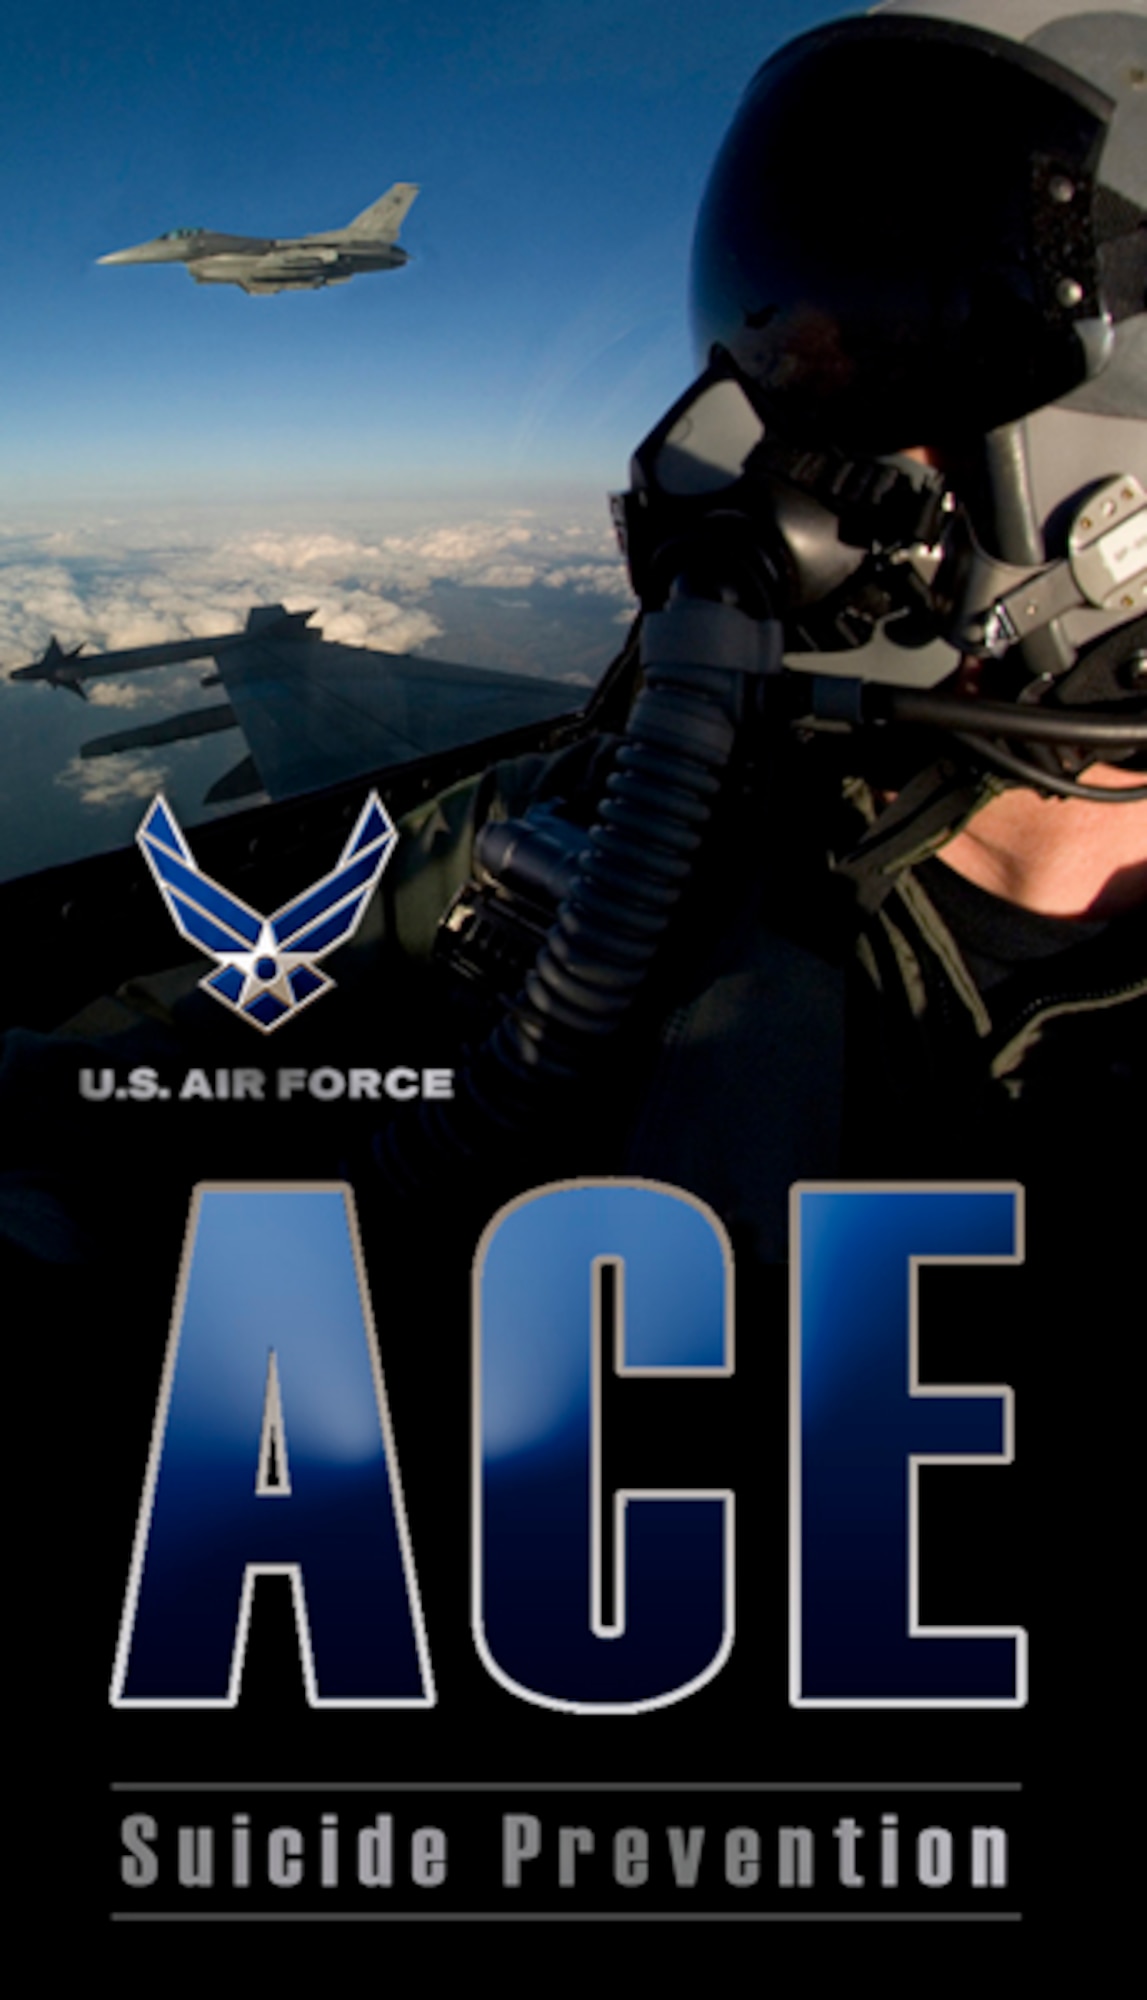 Suicide Prevention: Air Force Ace Suicide Prevention Card (U.S. Air Force graphic)